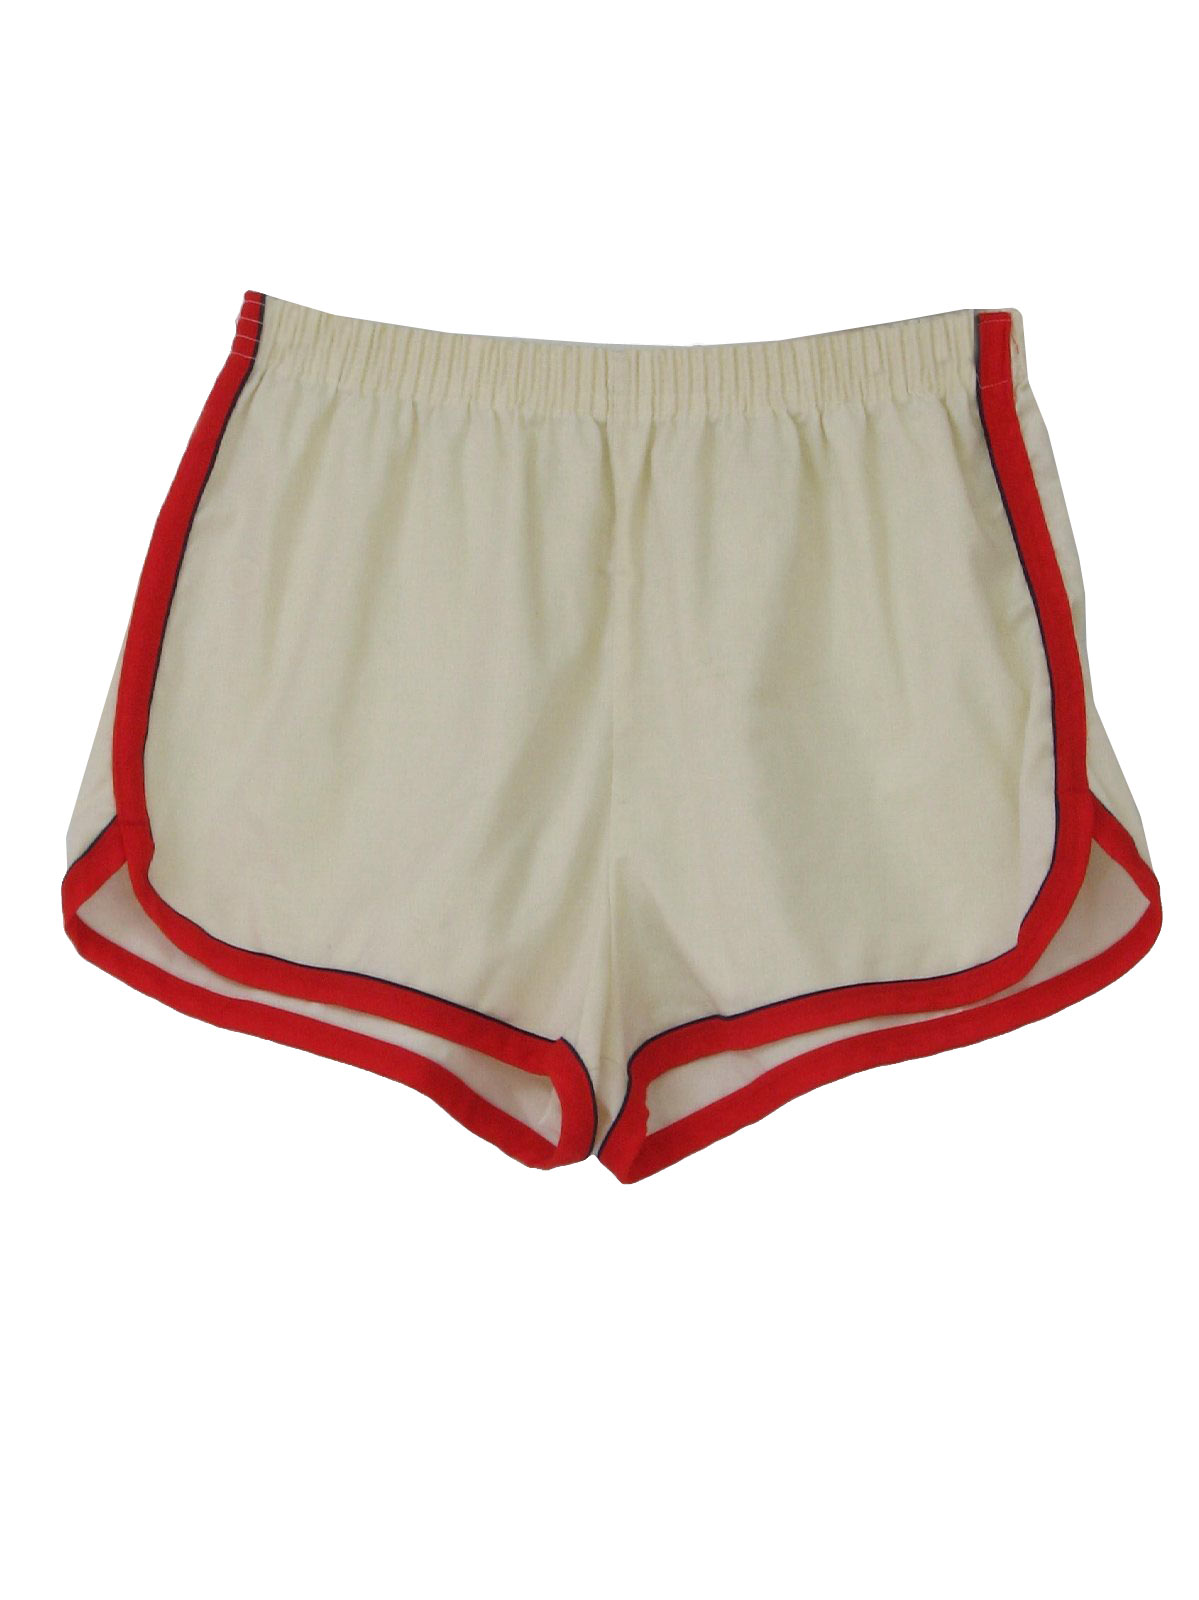 80's Missing Label Shorts: 80s -Missing Label- Mens off white, red and ...